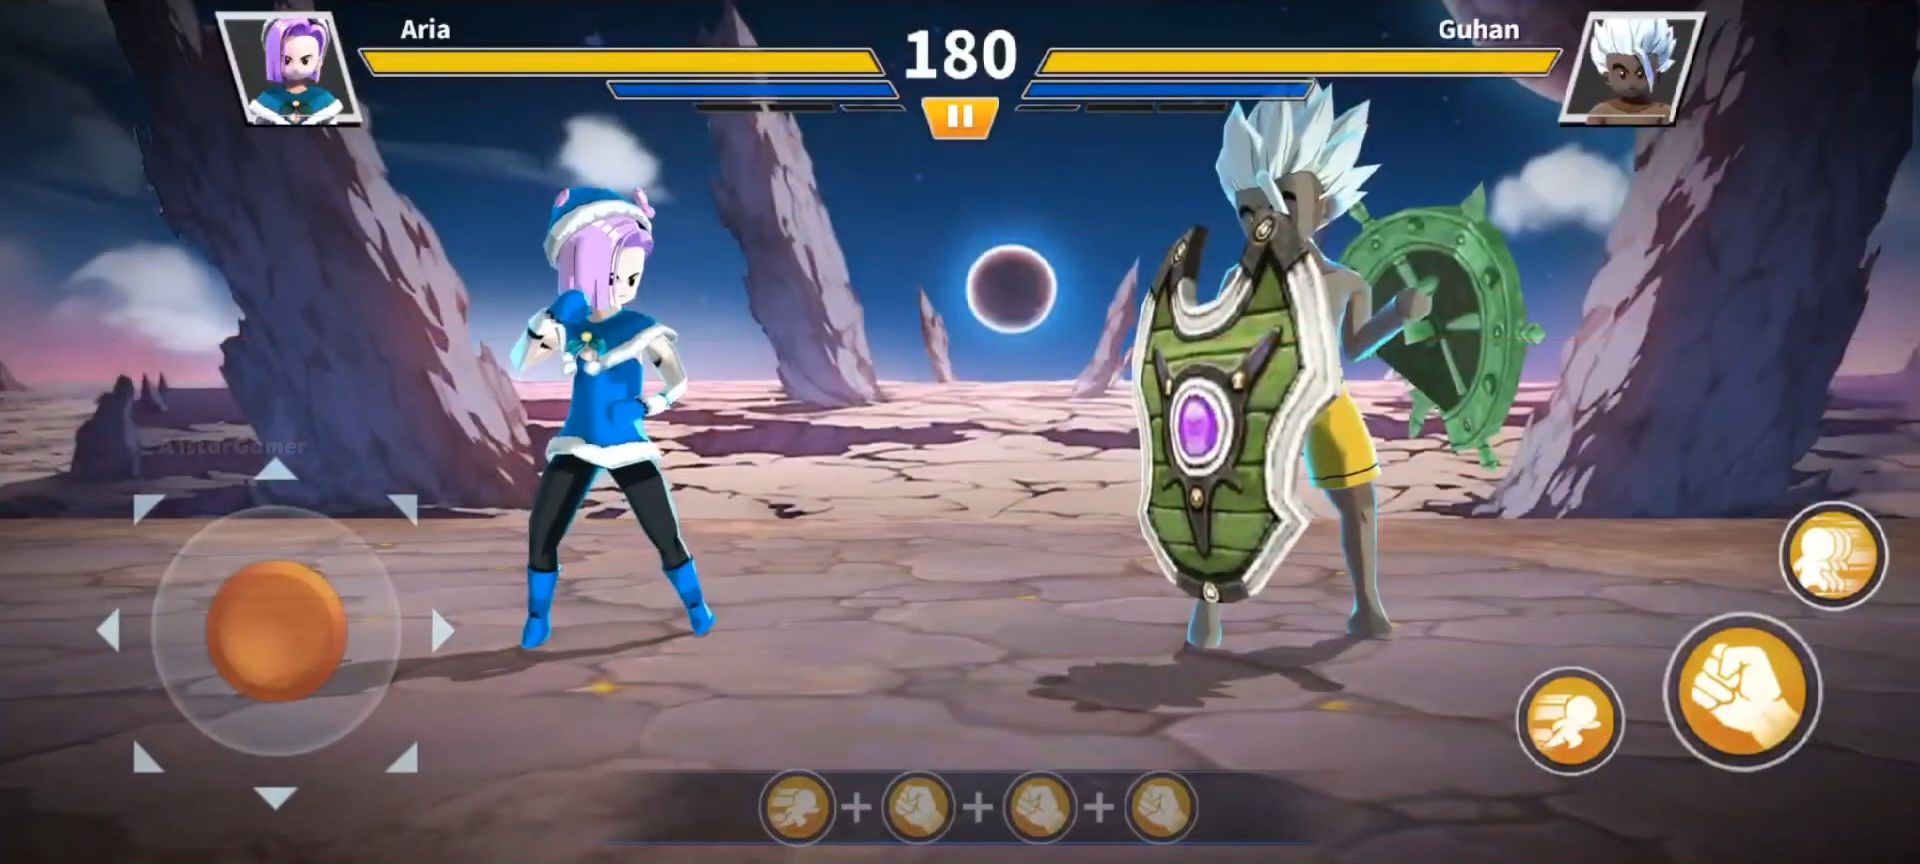 Gameplay of the Dragon Champion Z for Android phone or tablet.